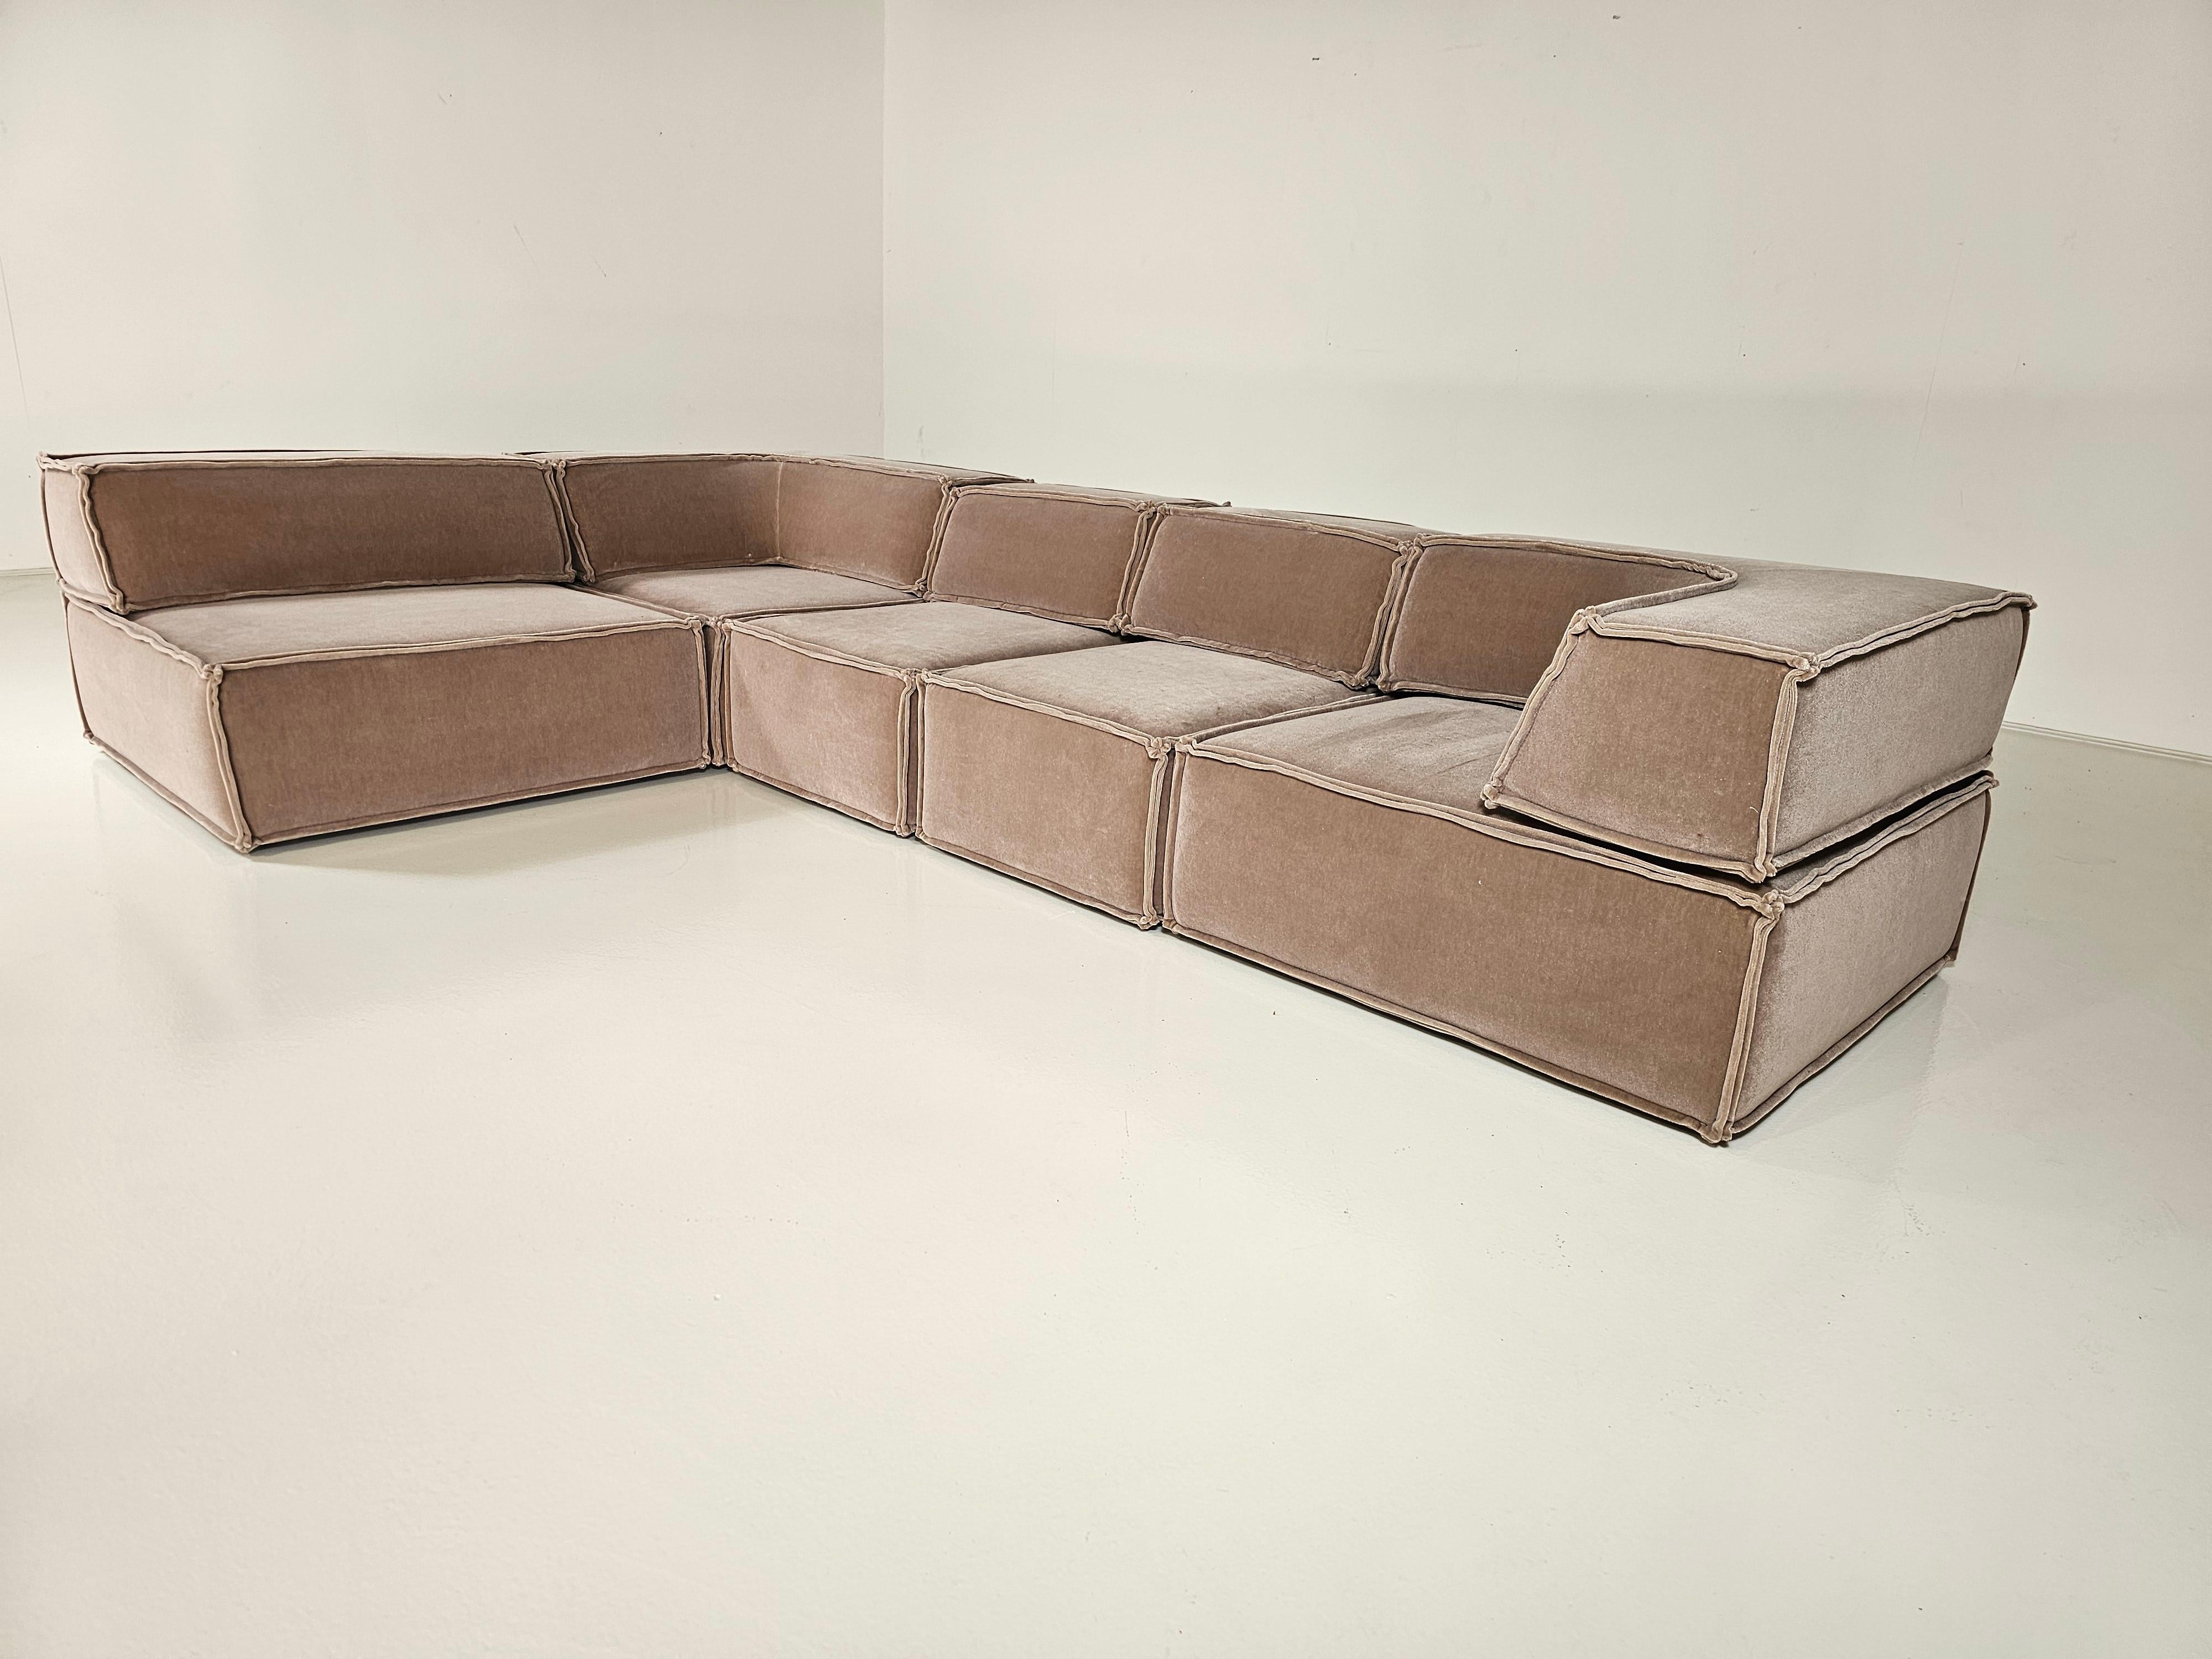 This comfortable new upholstered sectional sofa was designed by the Swiss Designers Group Team Form AG and produced in the 1970s by COR, Germany.  All sections of the sofa can be arranged at your will. Even the backrests can be positioned freely.